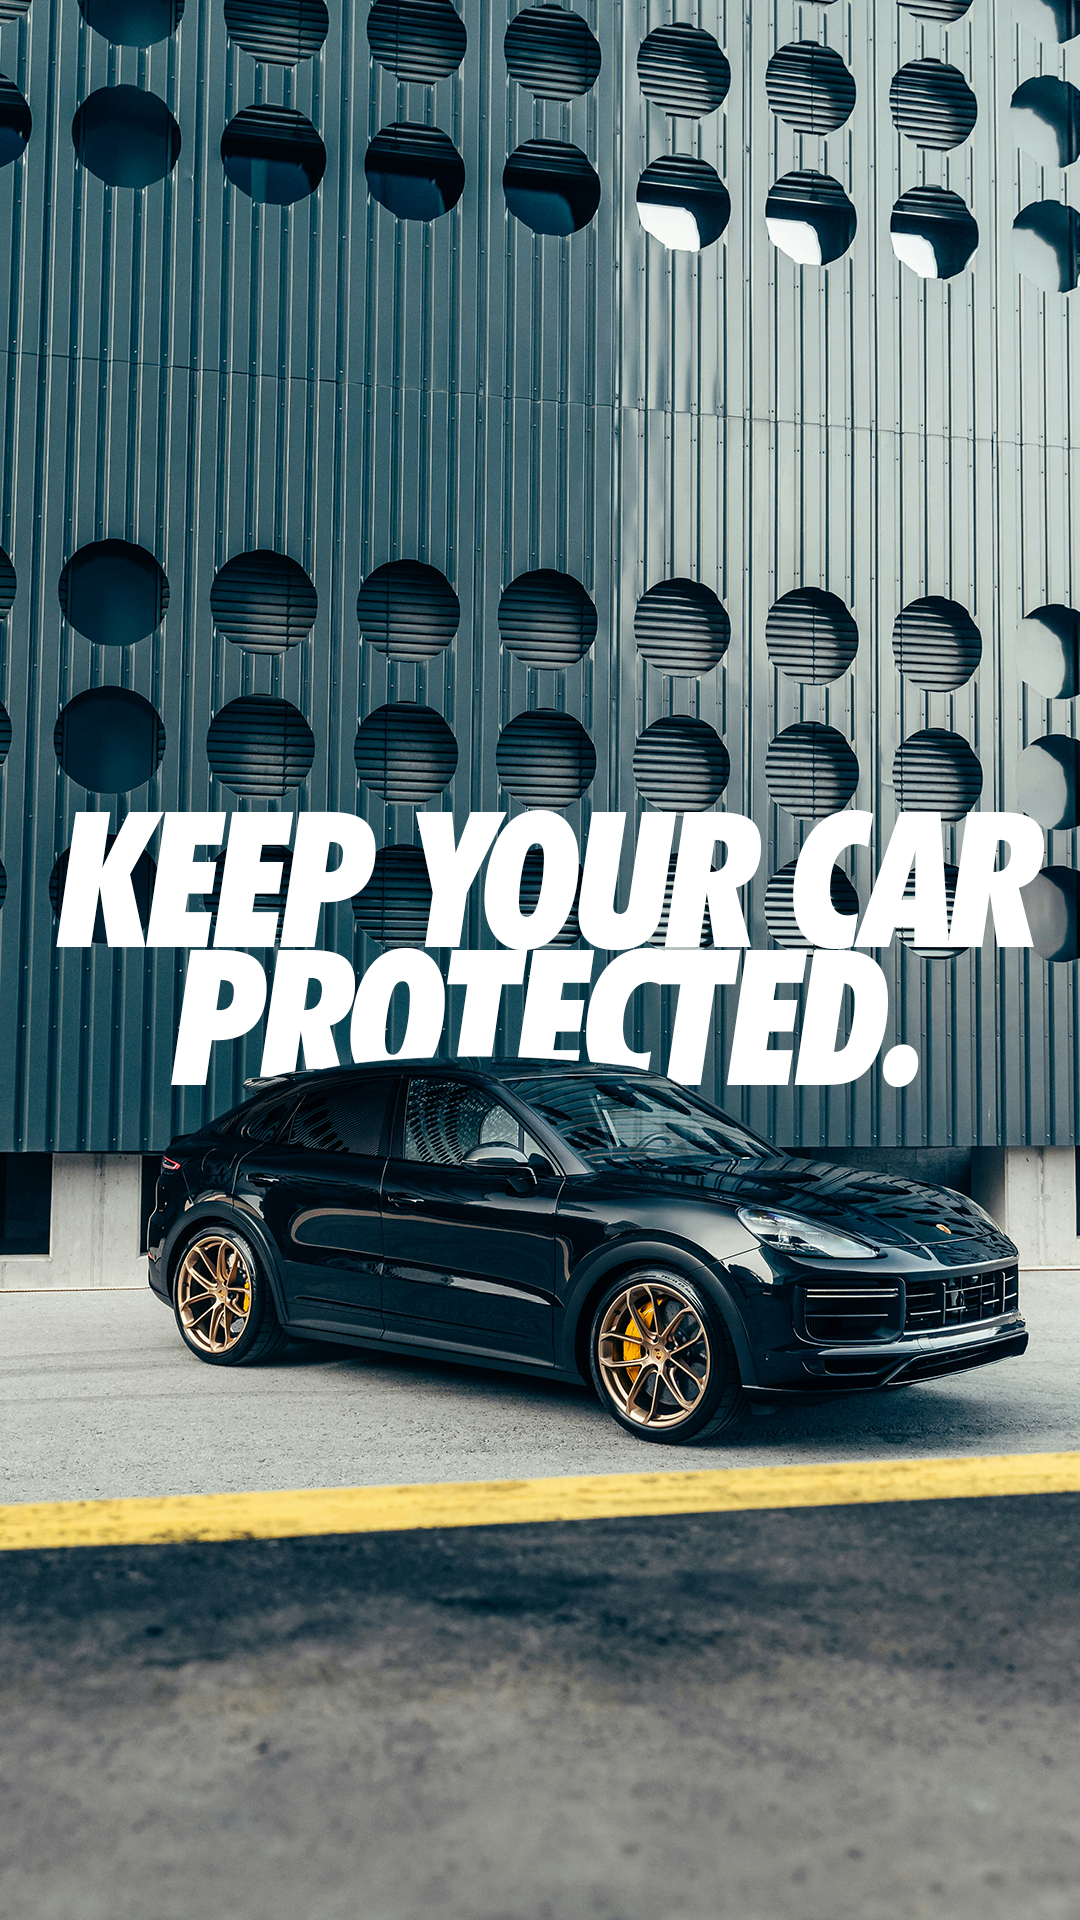 KEEP-YOUR-CAR-PROTECTED-MOBILE.png